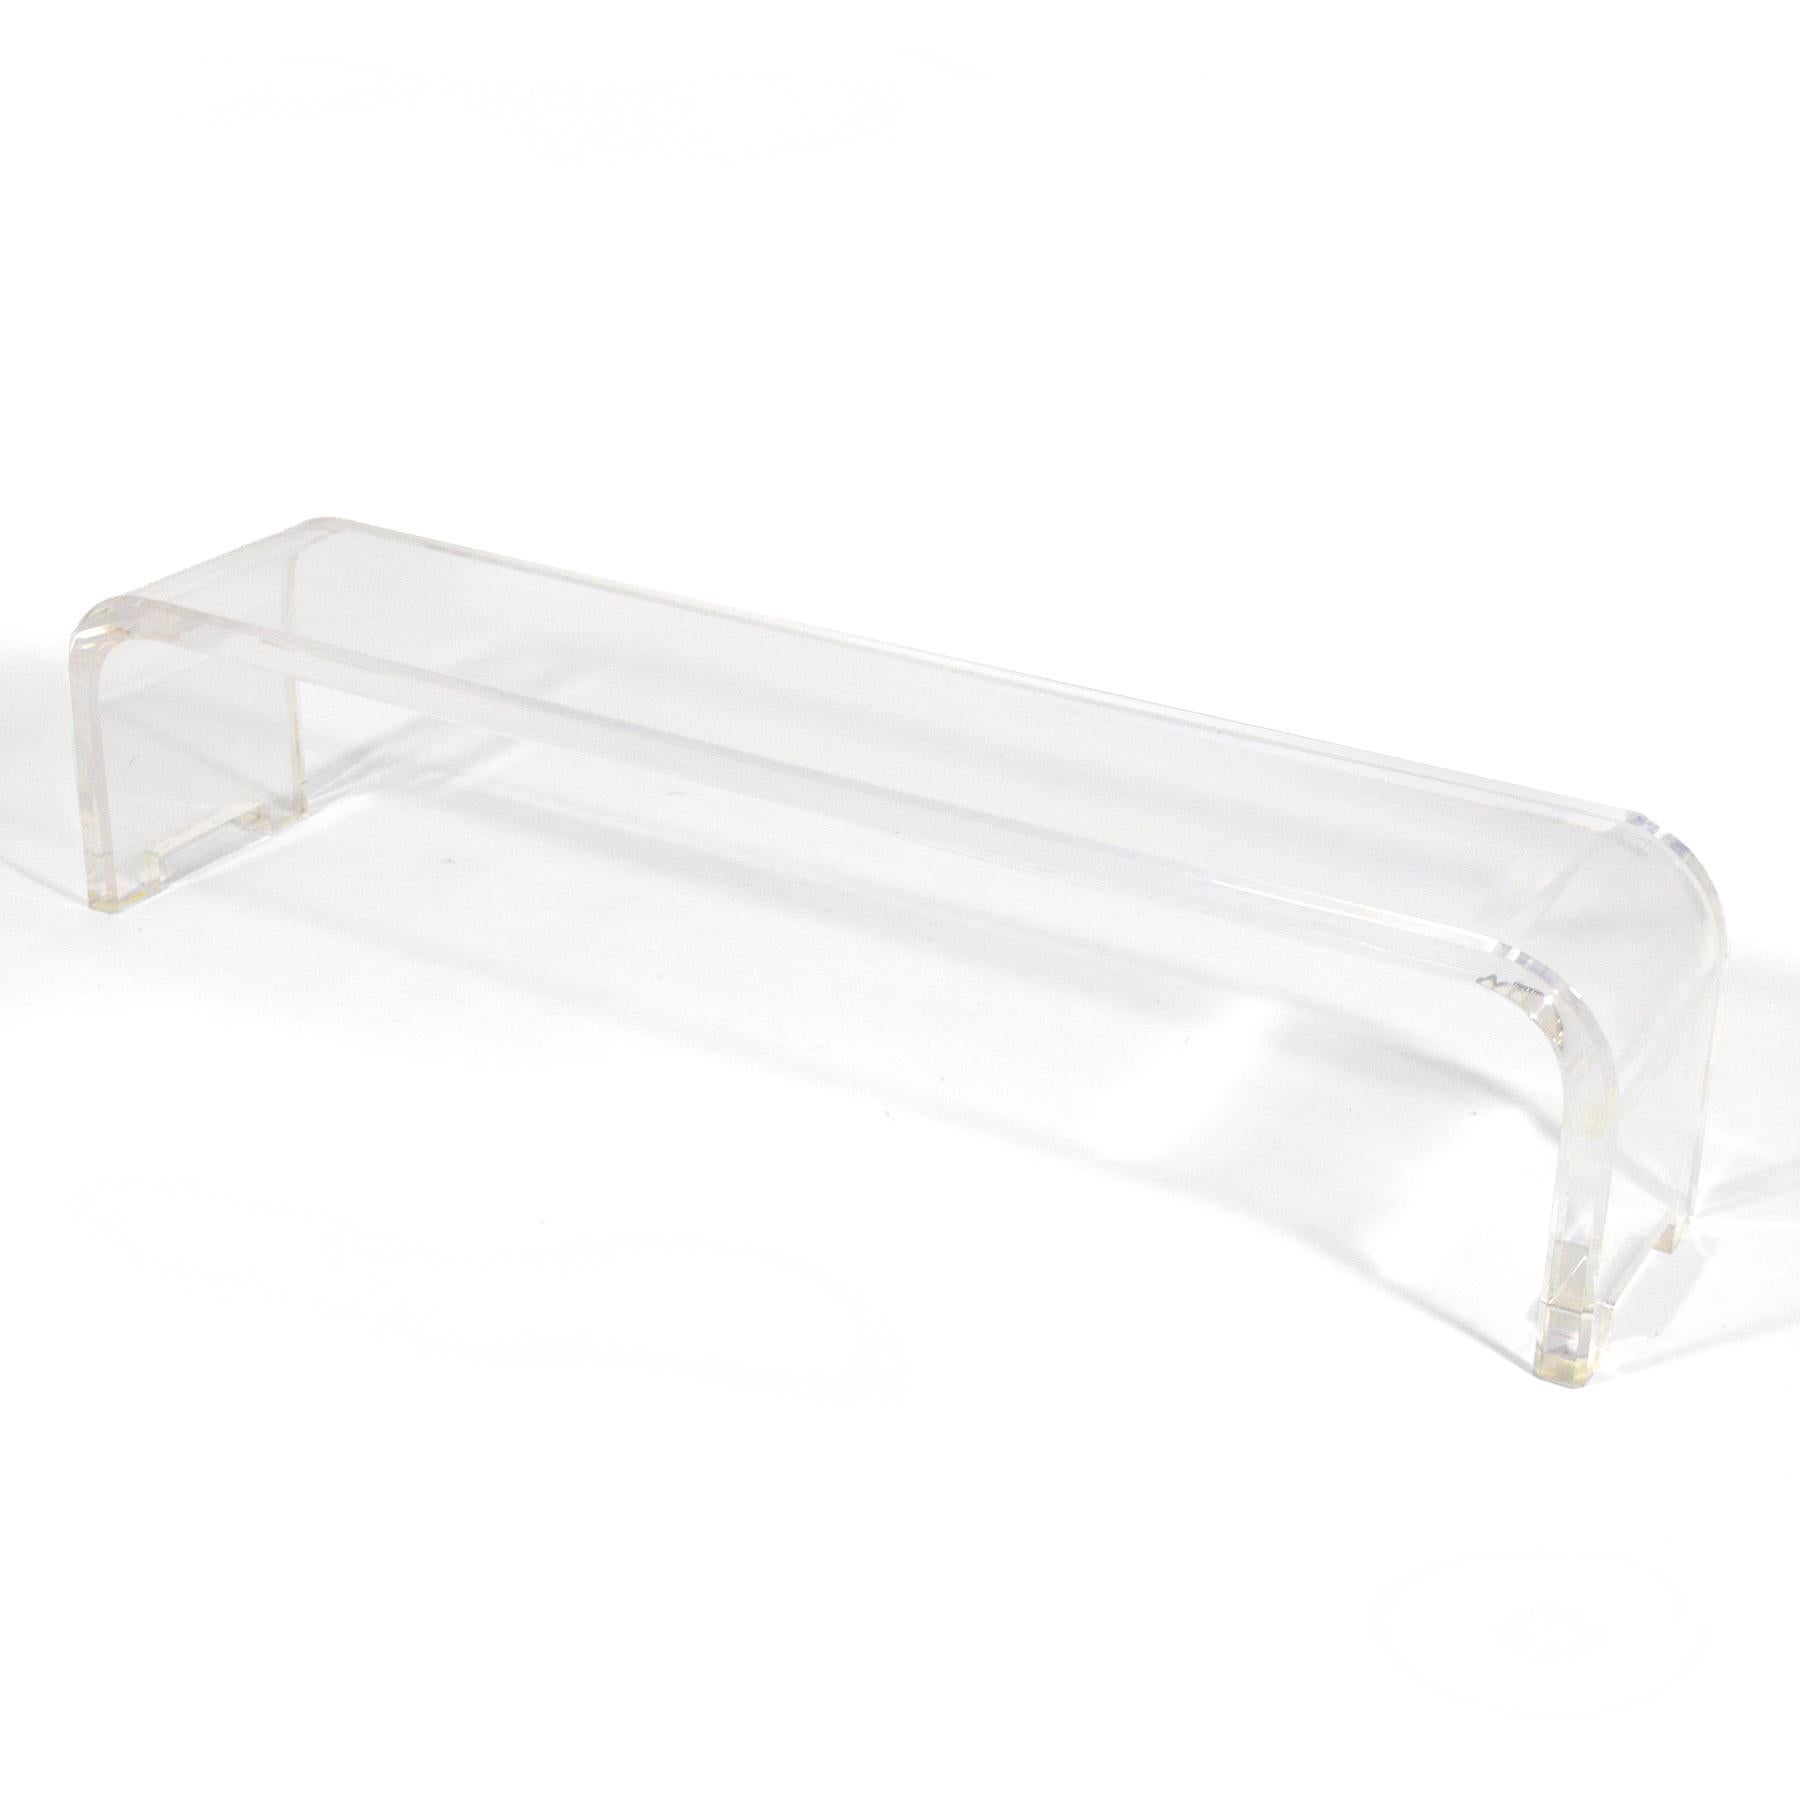 This large, dramatic bench is formed of one solid piece of lucite with waterfall edges and nicely detailed feet. The thick lucite gives it substantial heft belied by the light, transparent quality of the clear acrylic.

16.25”h X 71.5”w X14”d